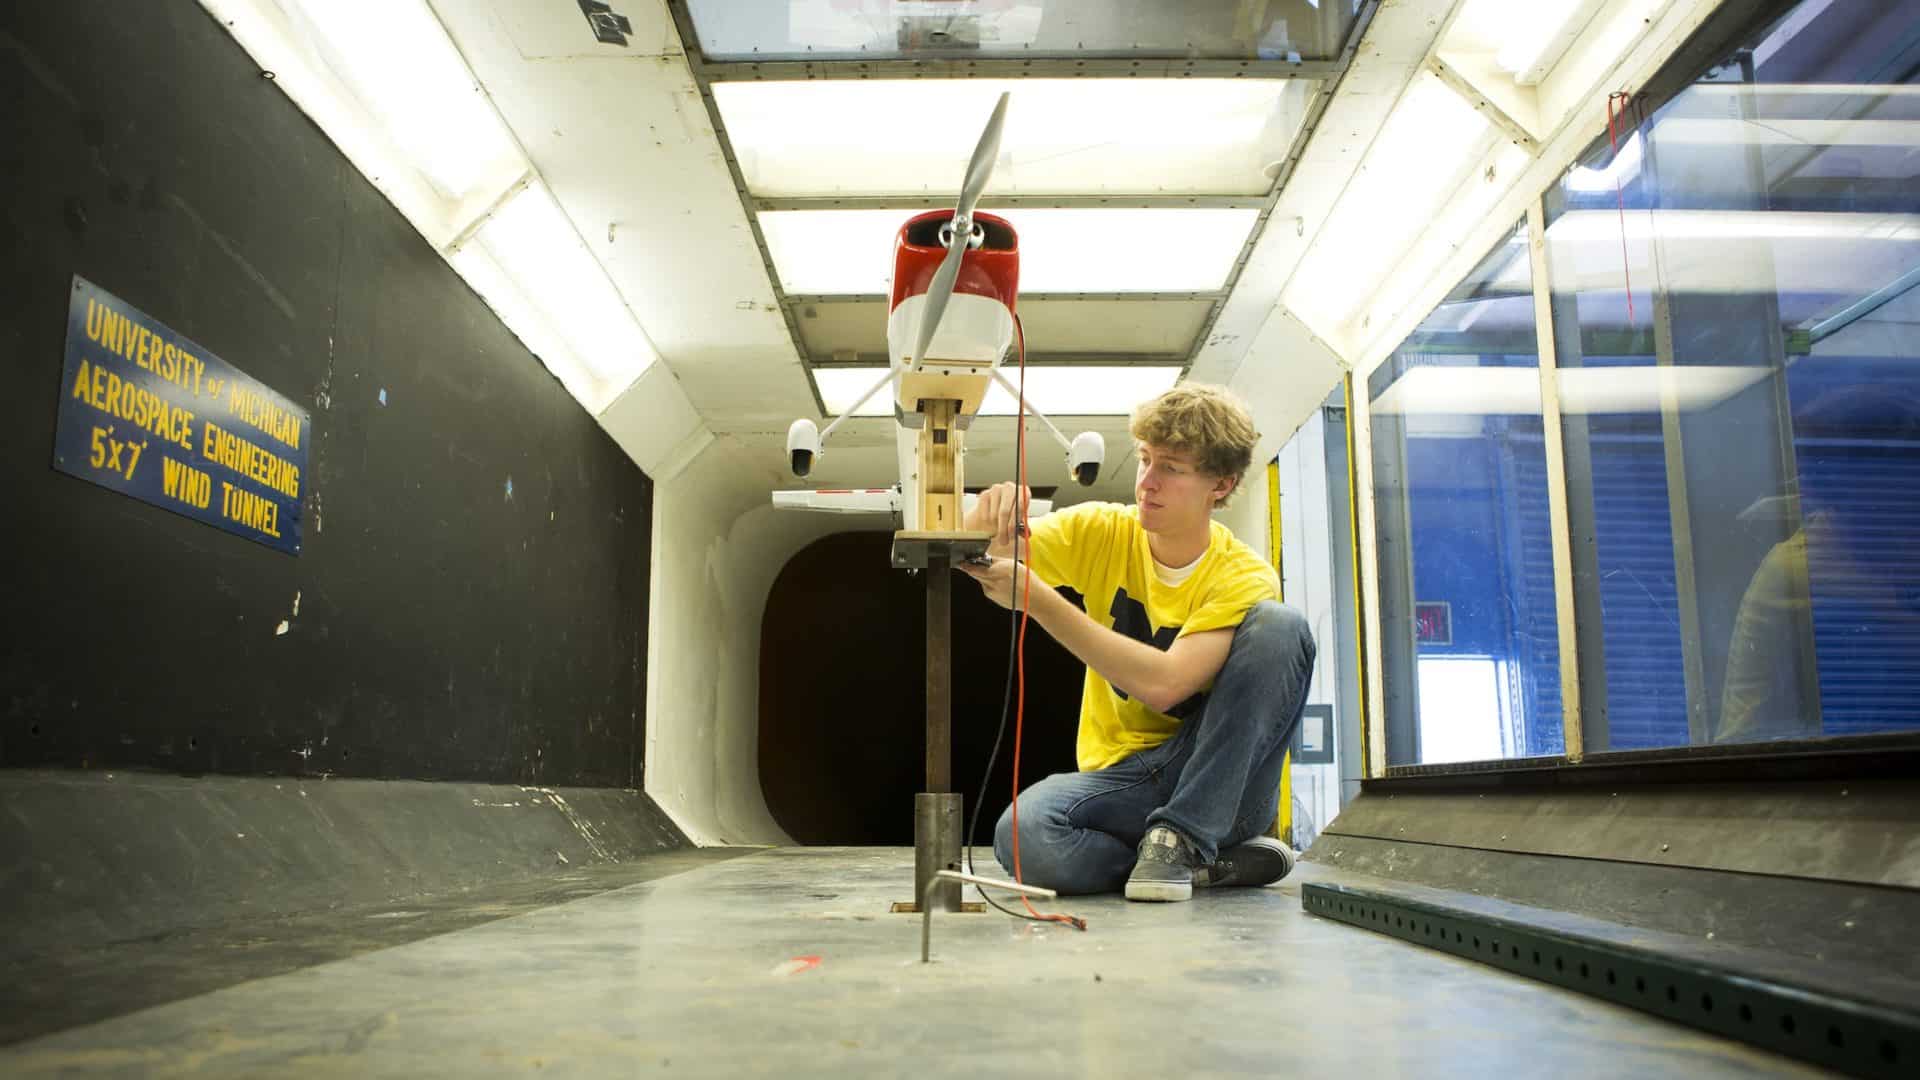 male student adjusts a plane that he is testing